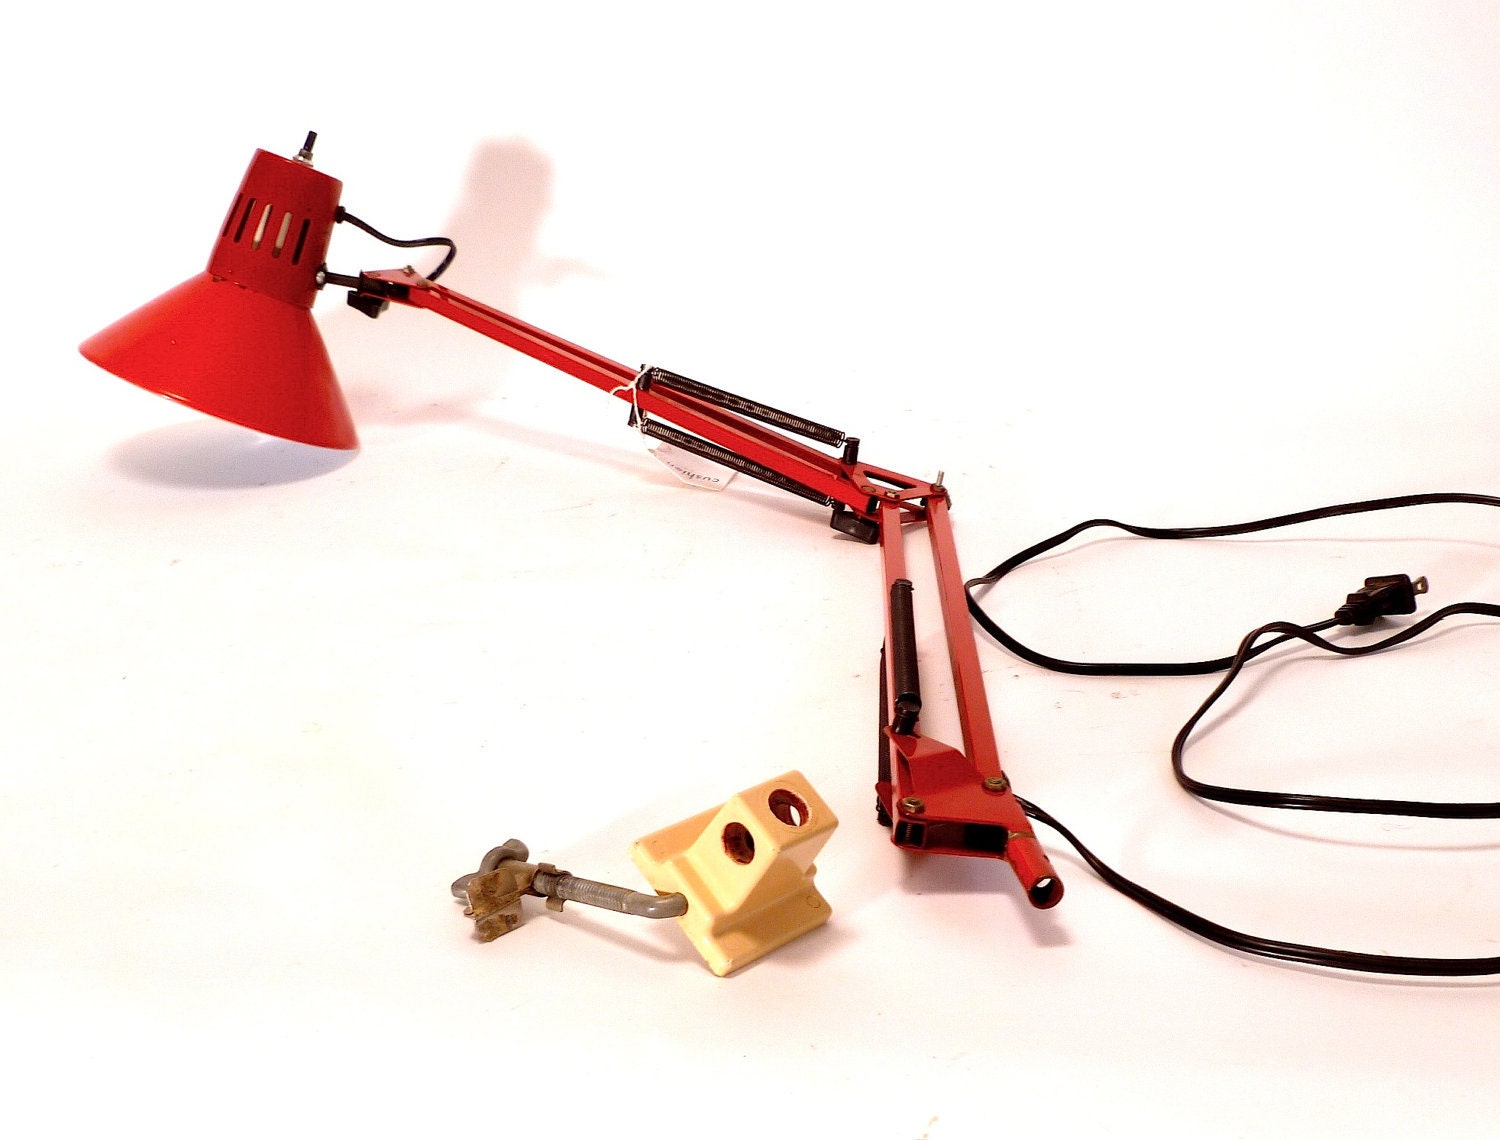 Anglepoise Desk Lamps on Vintage Tomato Red Metal Anglepoise Desk Lamp By Cushionchicago